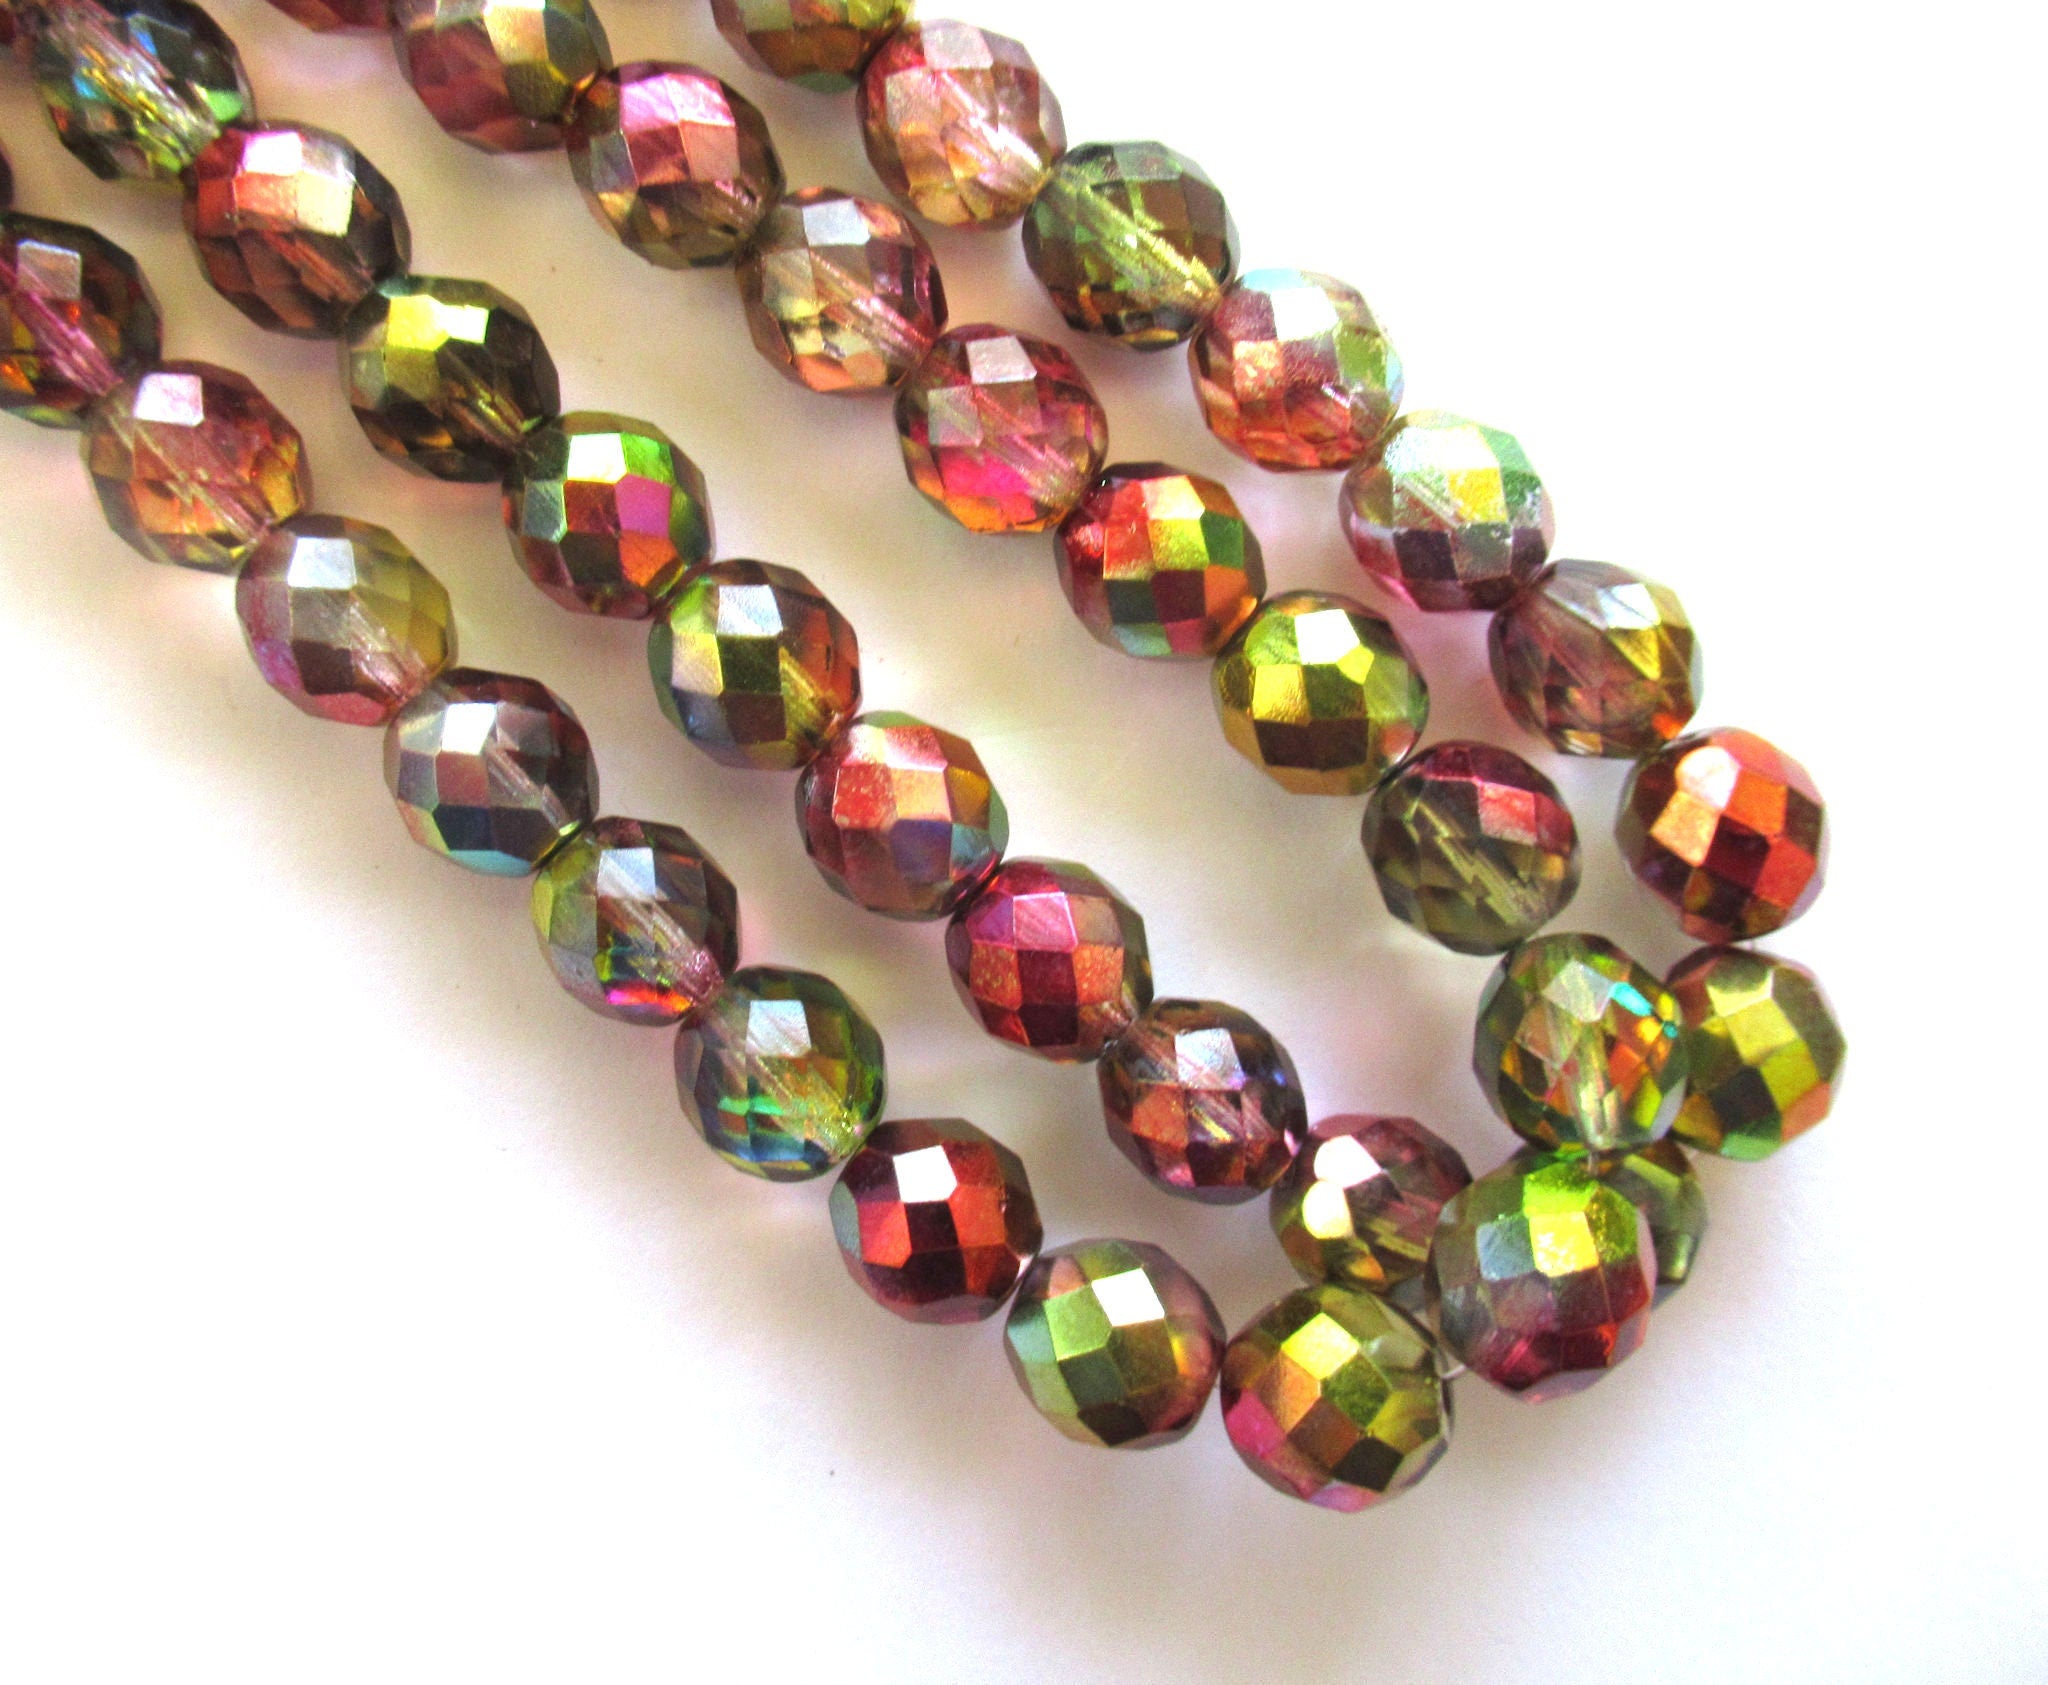 30 10mm Clear Crystal Faceted Round Beads Crystal Glass Beads Full Strand by Smileyboy | Michaels